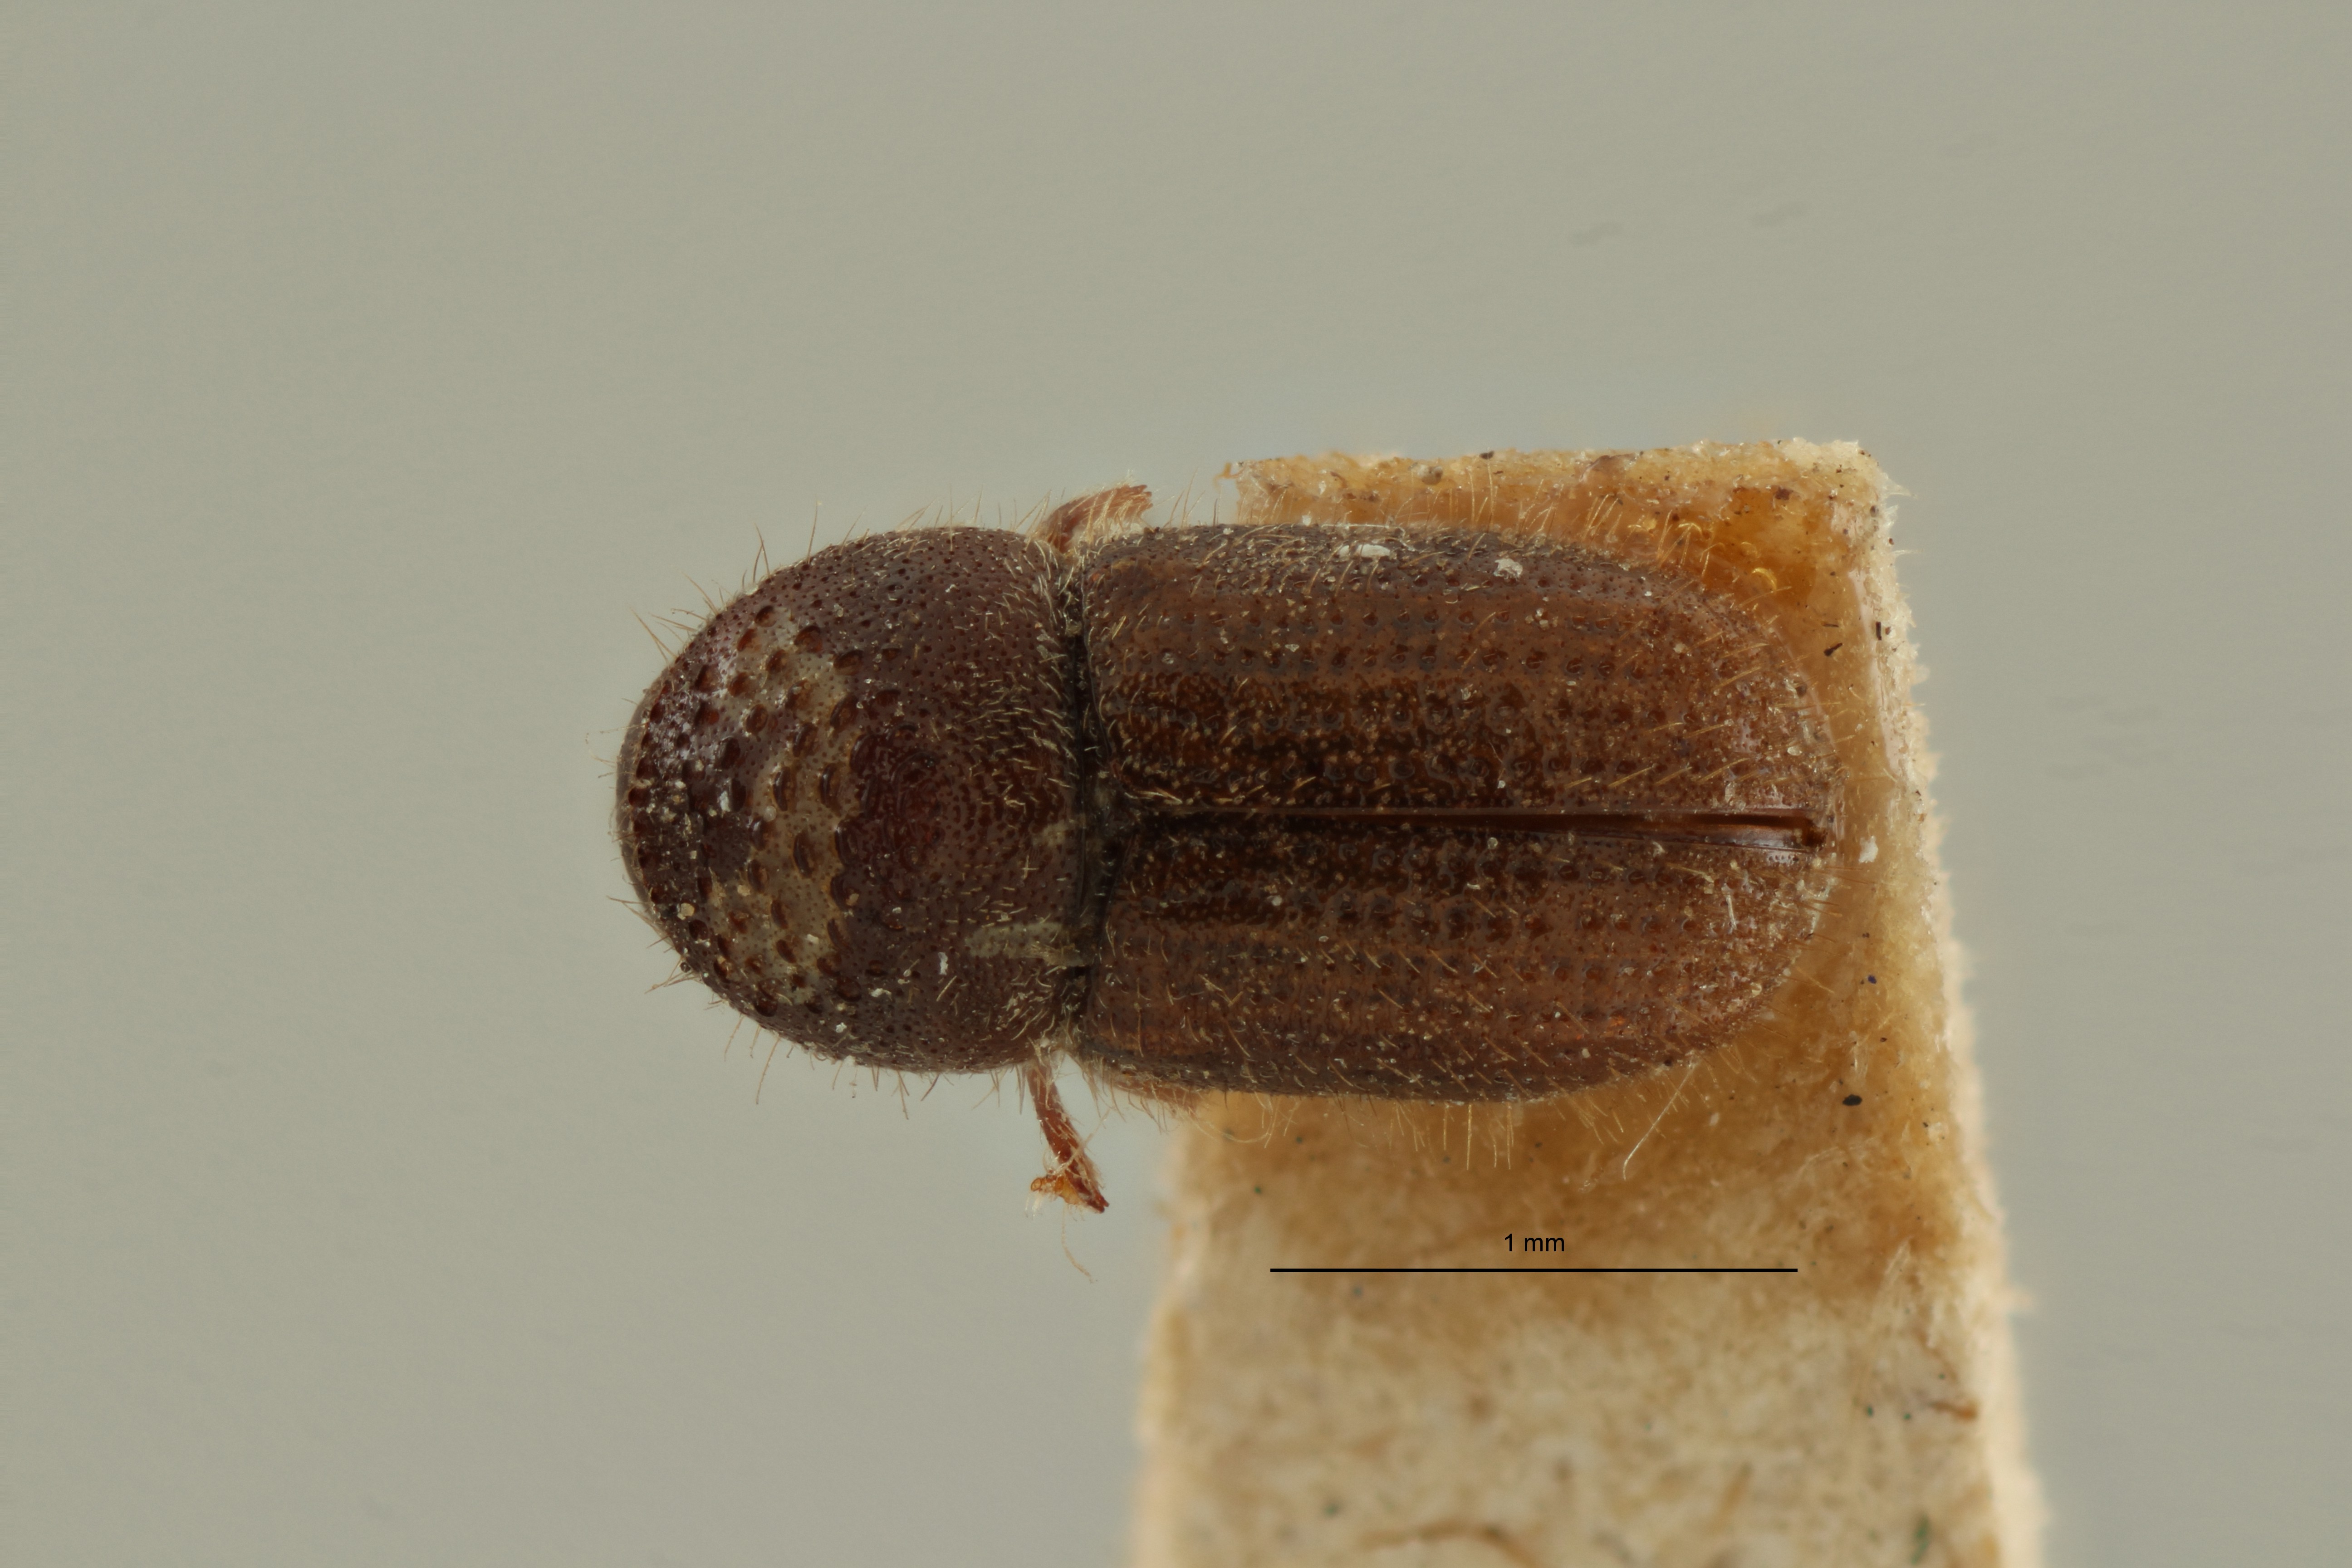 Cryphalus robustus t D ZS PMax Scaled.jpeg